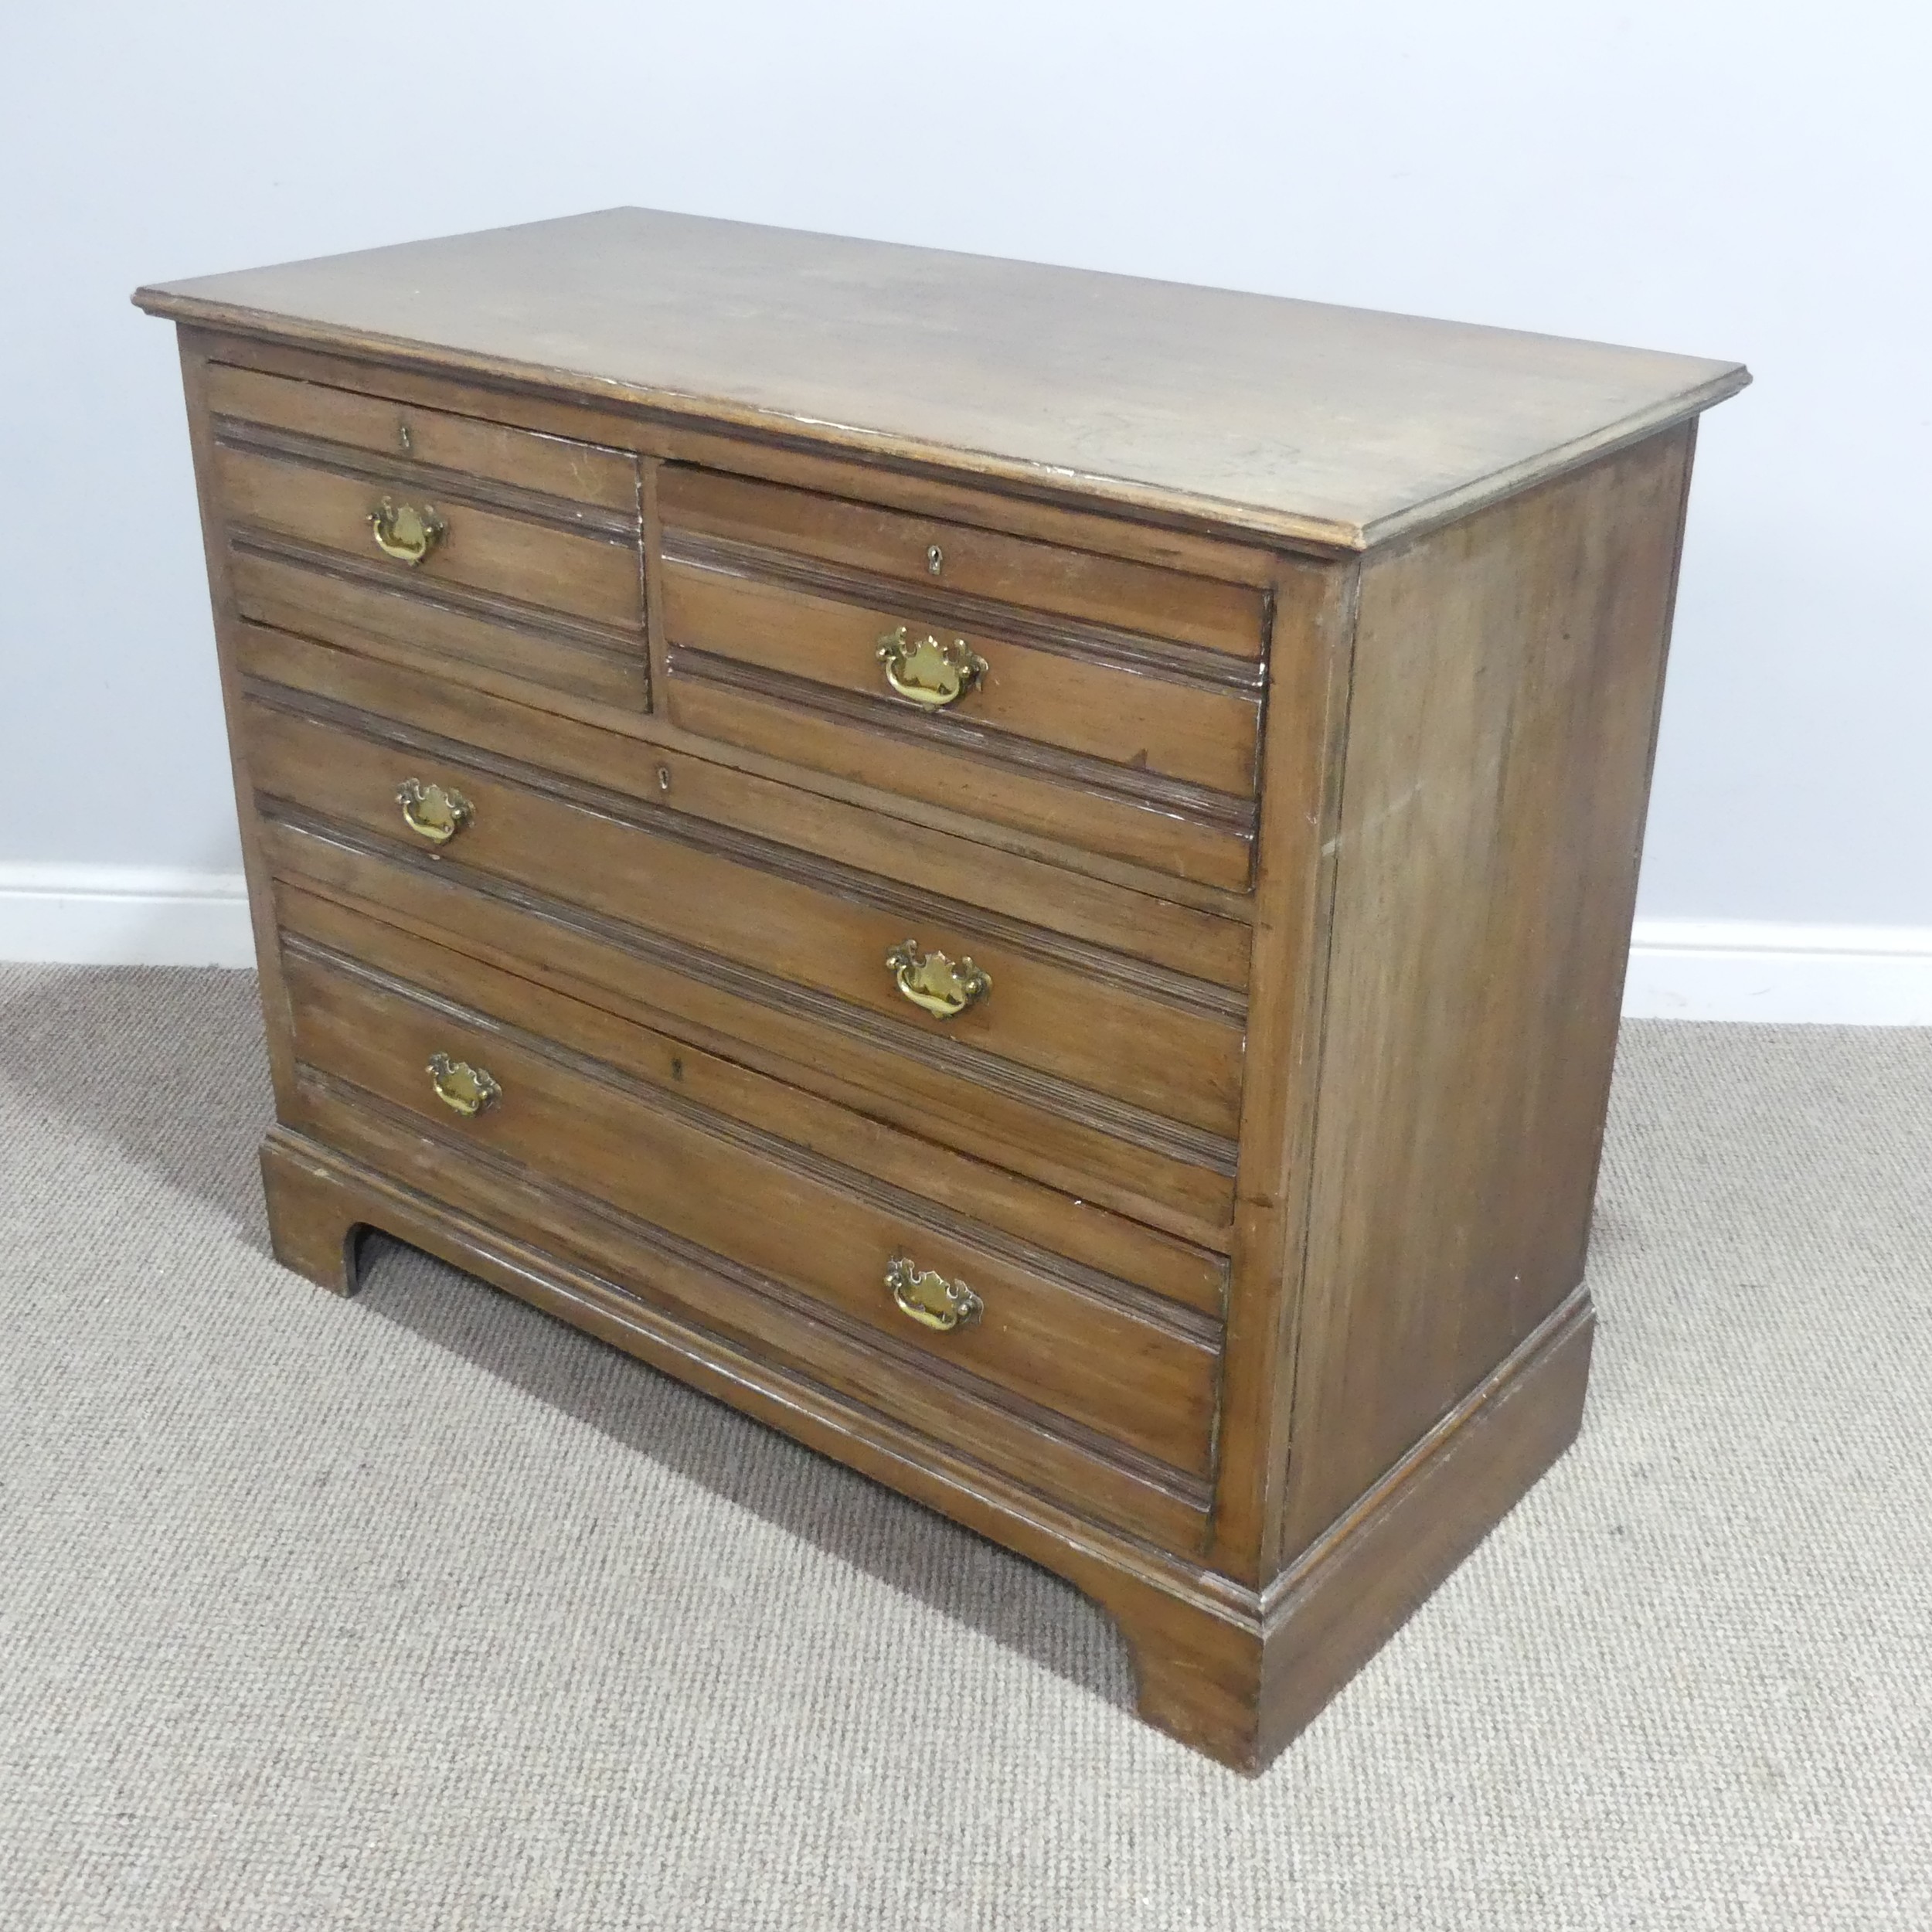 An Edwardian mahogany Chest of drawers, formerly a dressing chest, lock stamped 'H.L L', W 107 cm - Image 3 of 5